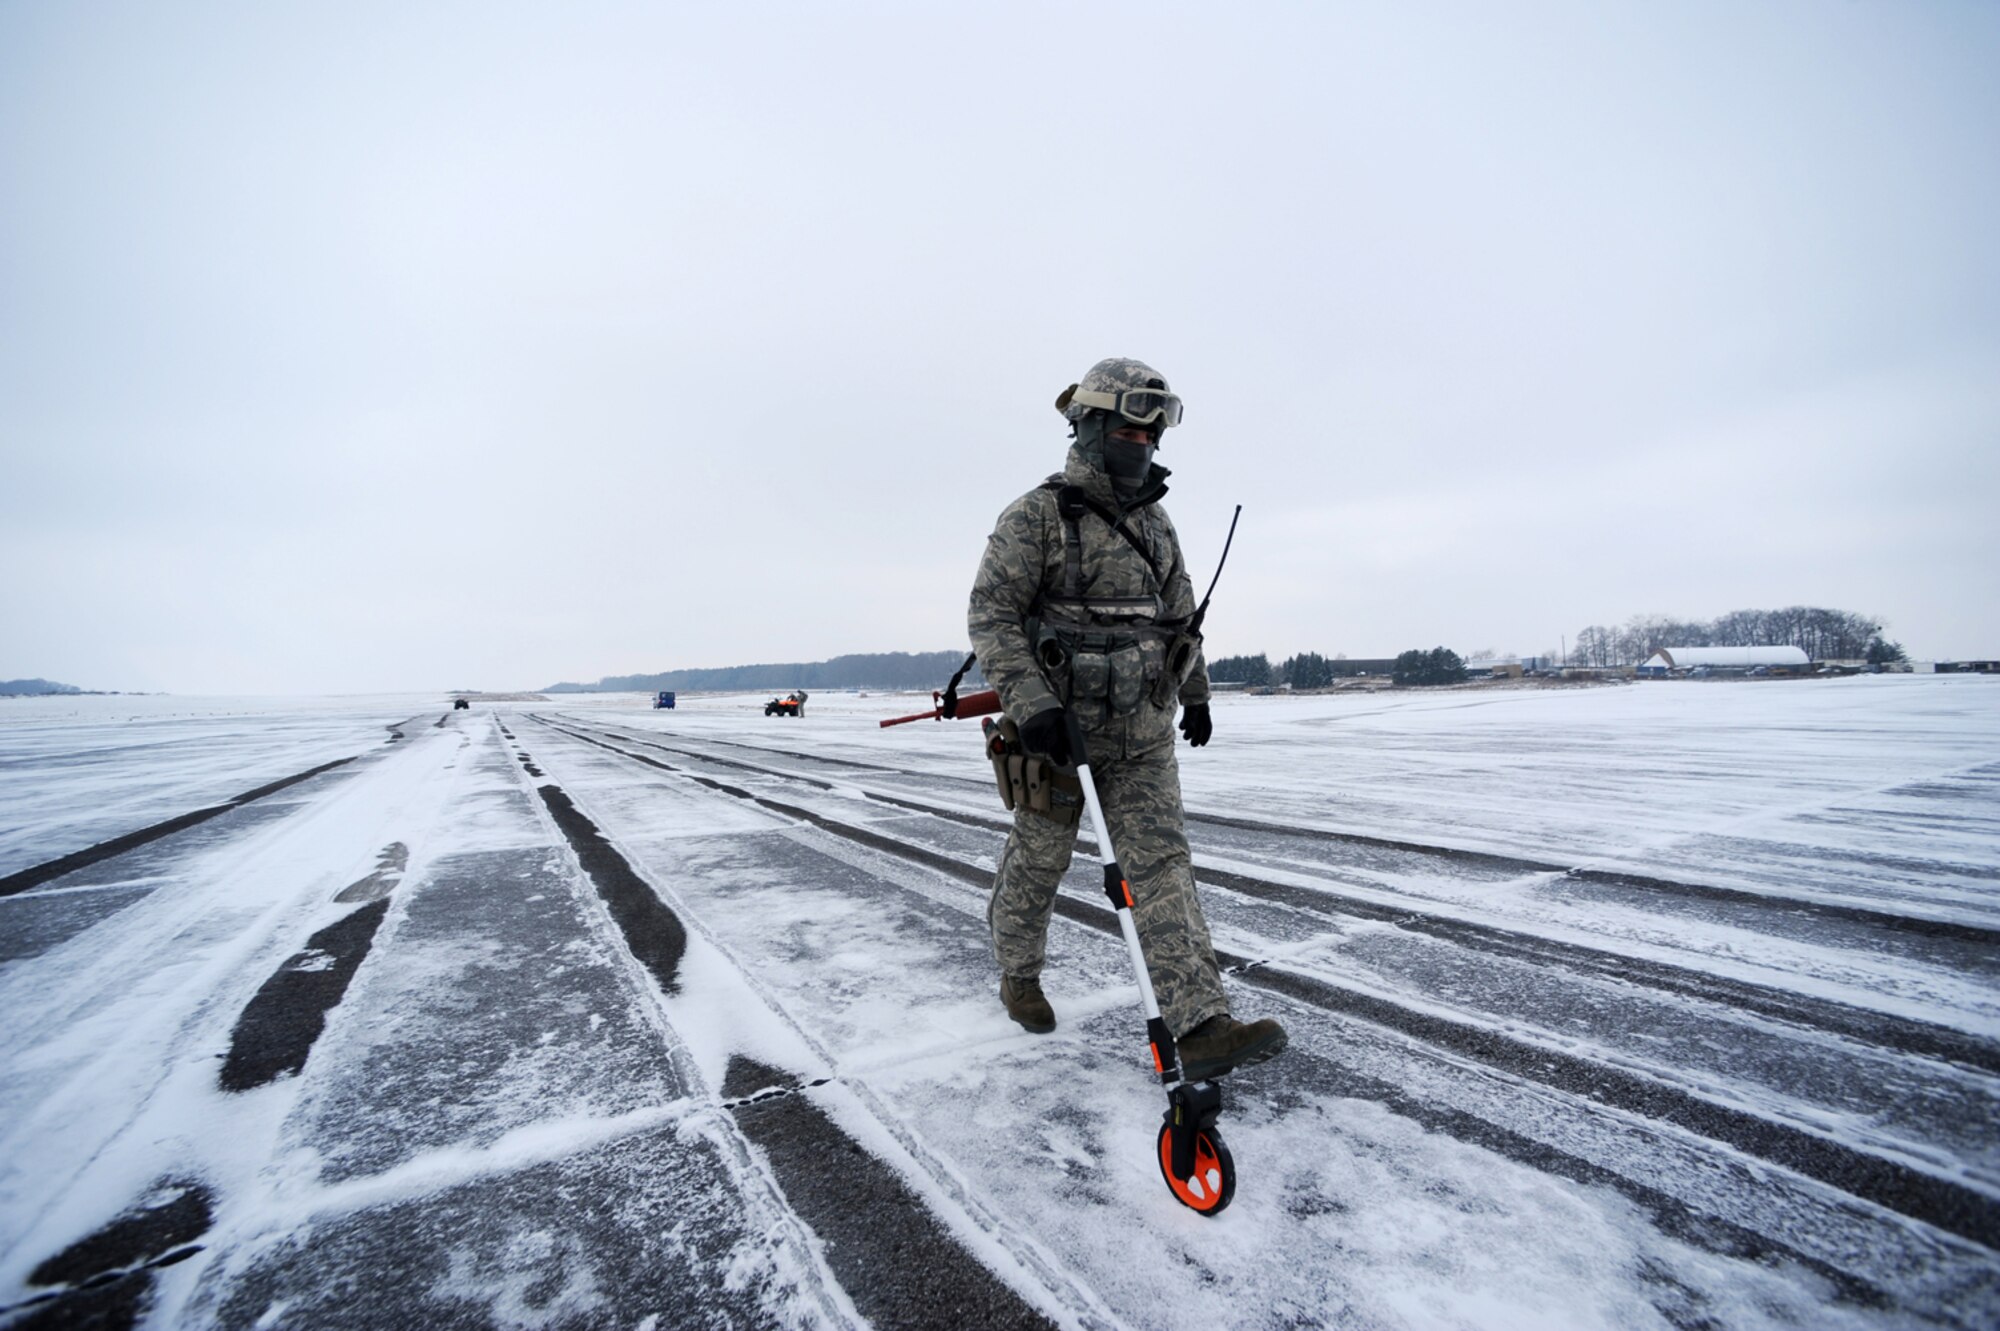 U.S. Air Force Master Sgt. Thomas Franz, 435th Air Mobility Squadron, contingency airfield manager, Ramstein Air Base, Germany, marks off a safe distance to set up reflective markers prior to the landing of C-130 Hercules carrying military members and cargo at Flugplatz Bitburg, Germany, Jan. 26, 2010, in preparation of Ramstein's operational readiness inspection in September. The units are setting up bare-base operations as part of the dual-wing operational readiness exercise with the 86th Airlift Wing. This is the second of five operational readiness exercises. (U.S. Air Force photo by Staff Sgt. Sarayuth Pinthong)